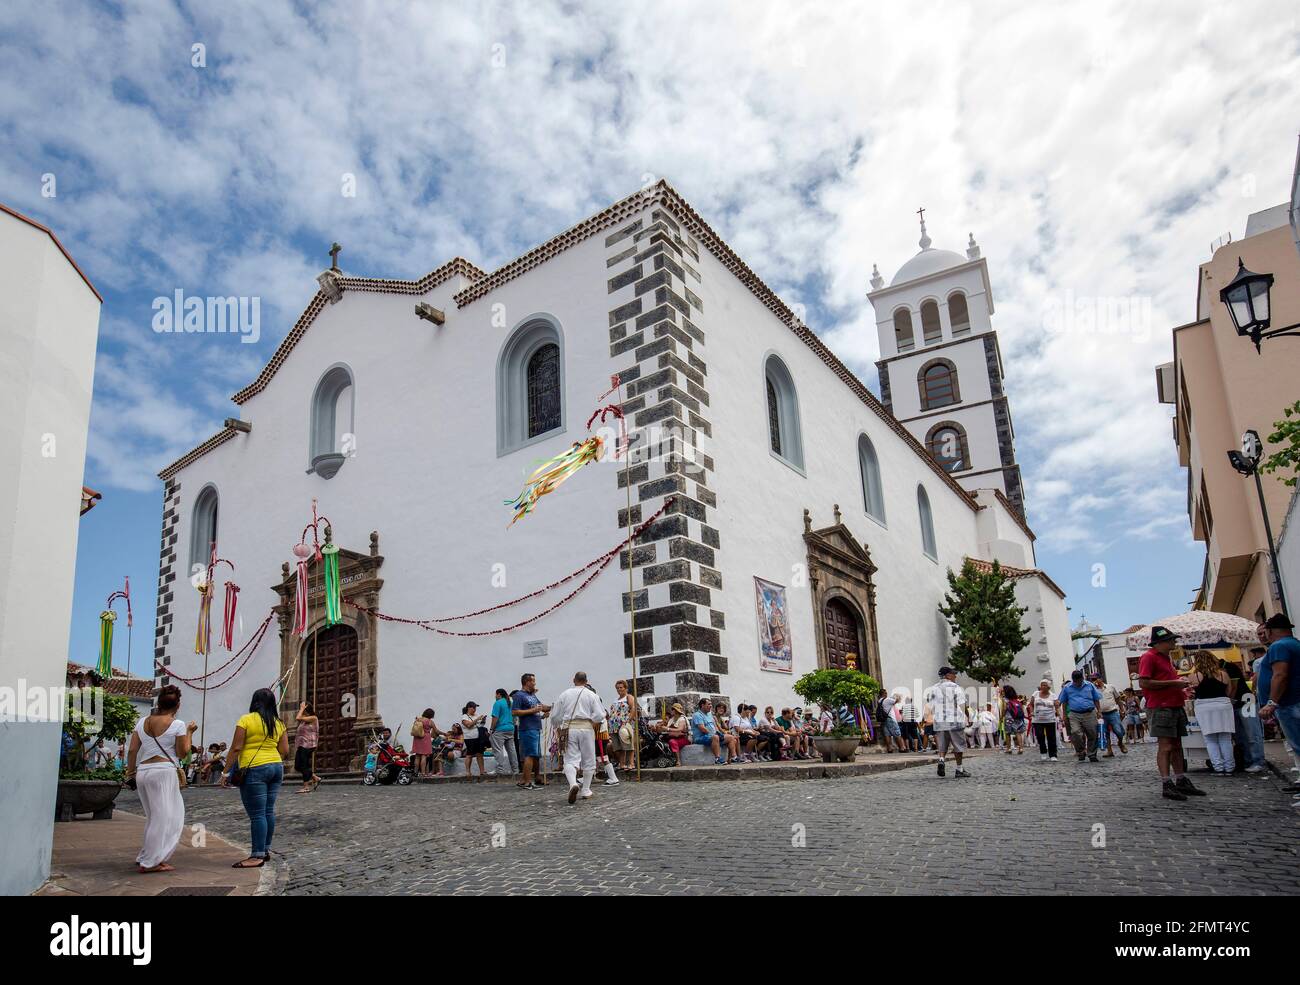 Garachico, Spain - August 16, 2015: Lustrales celebrations in honor of the Holy Christ of Mercy is a traditional folk festival which takes place every Stock Photo